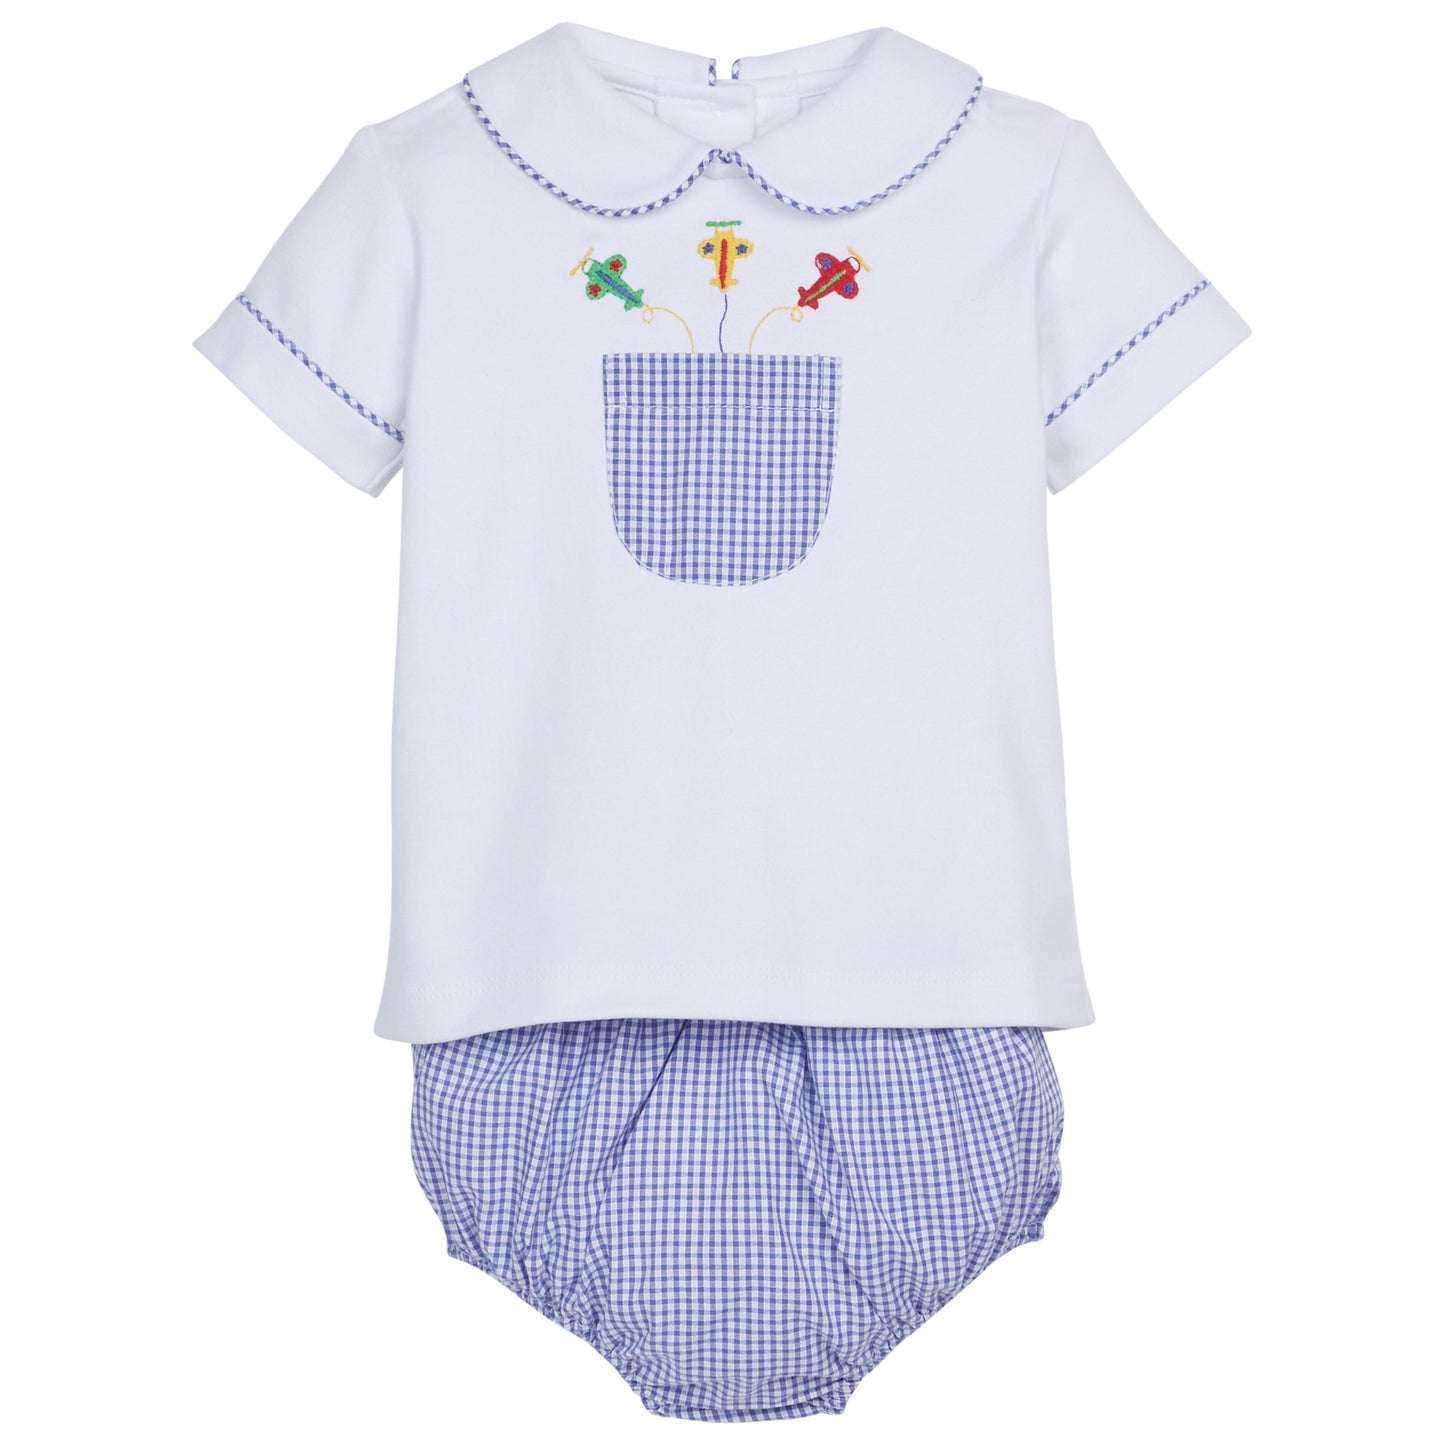 Little English Embroidered Peter Pan Diaper Set Airplane 